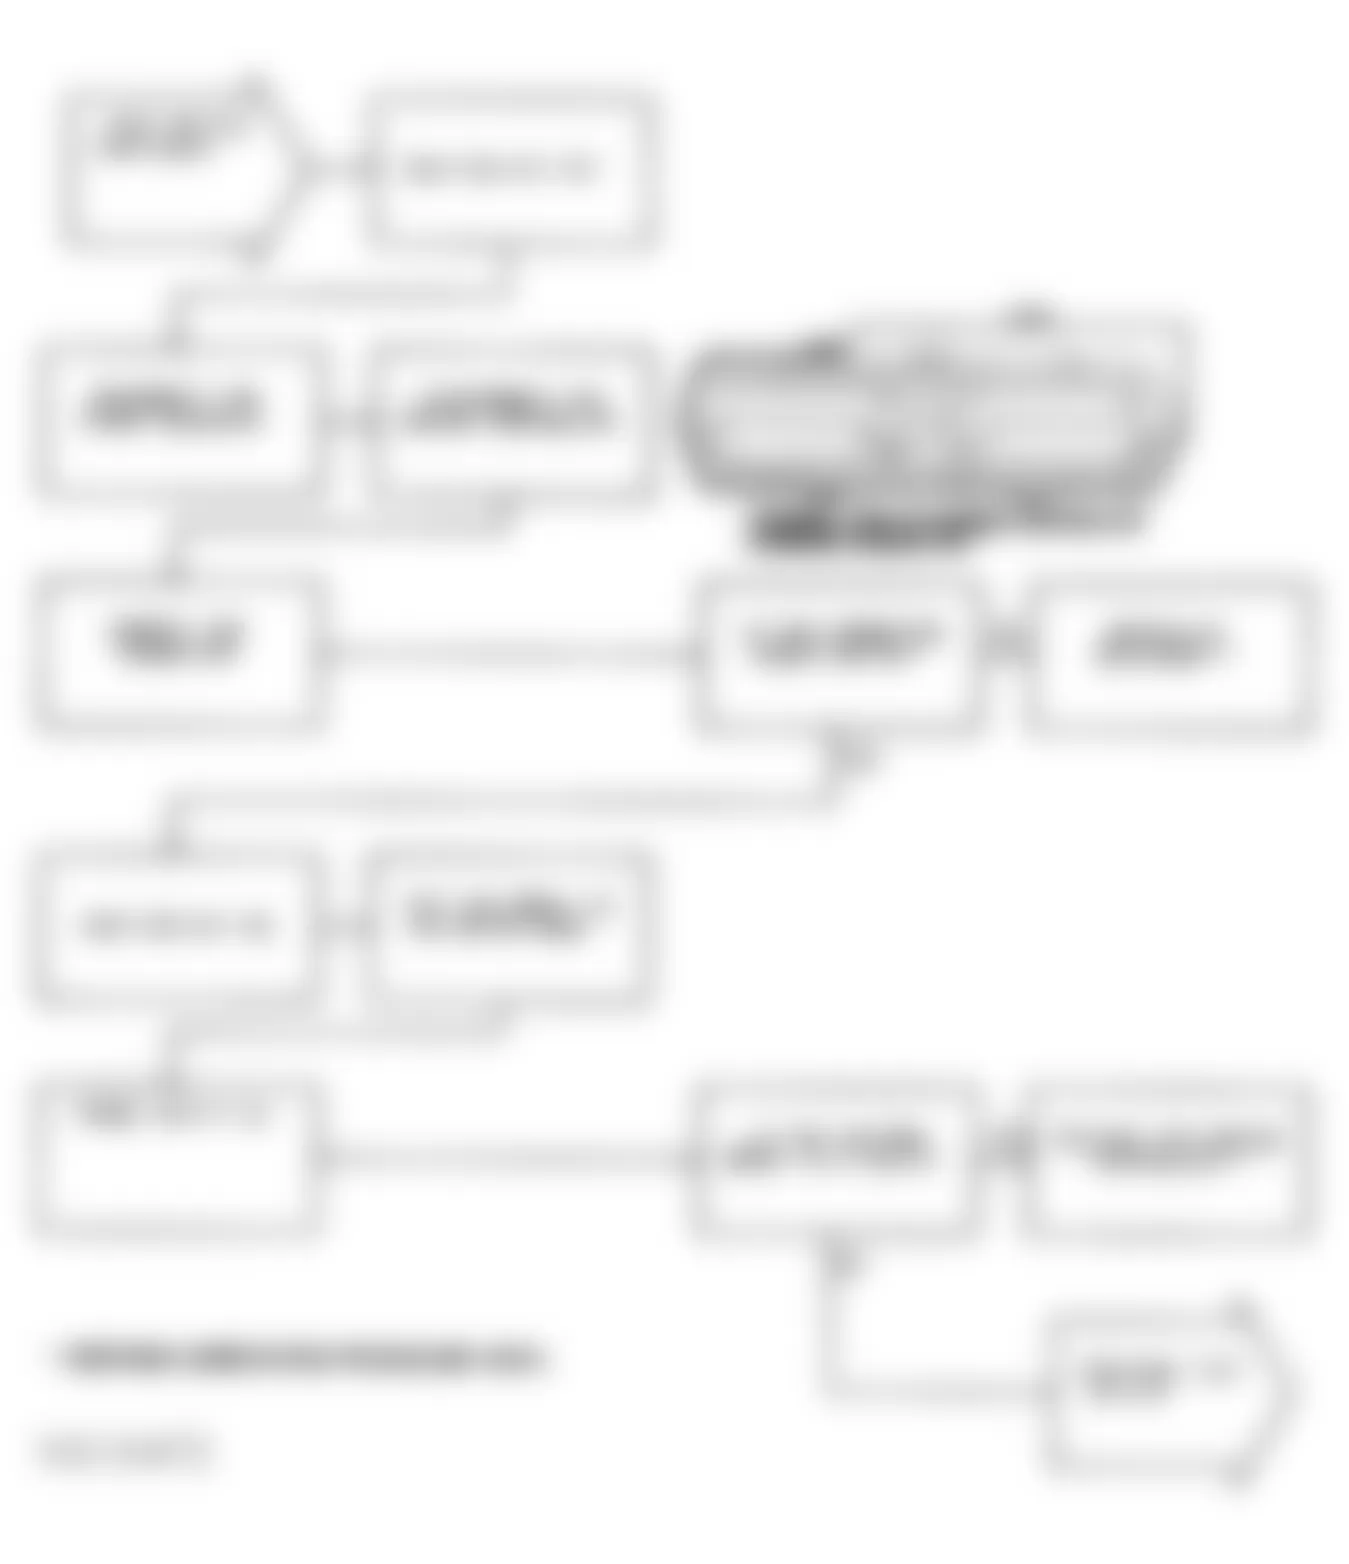 Chrysler Imperial 1991 - Component Locations -  Test DR-21A Code 31: Flowchart (2 of 3)